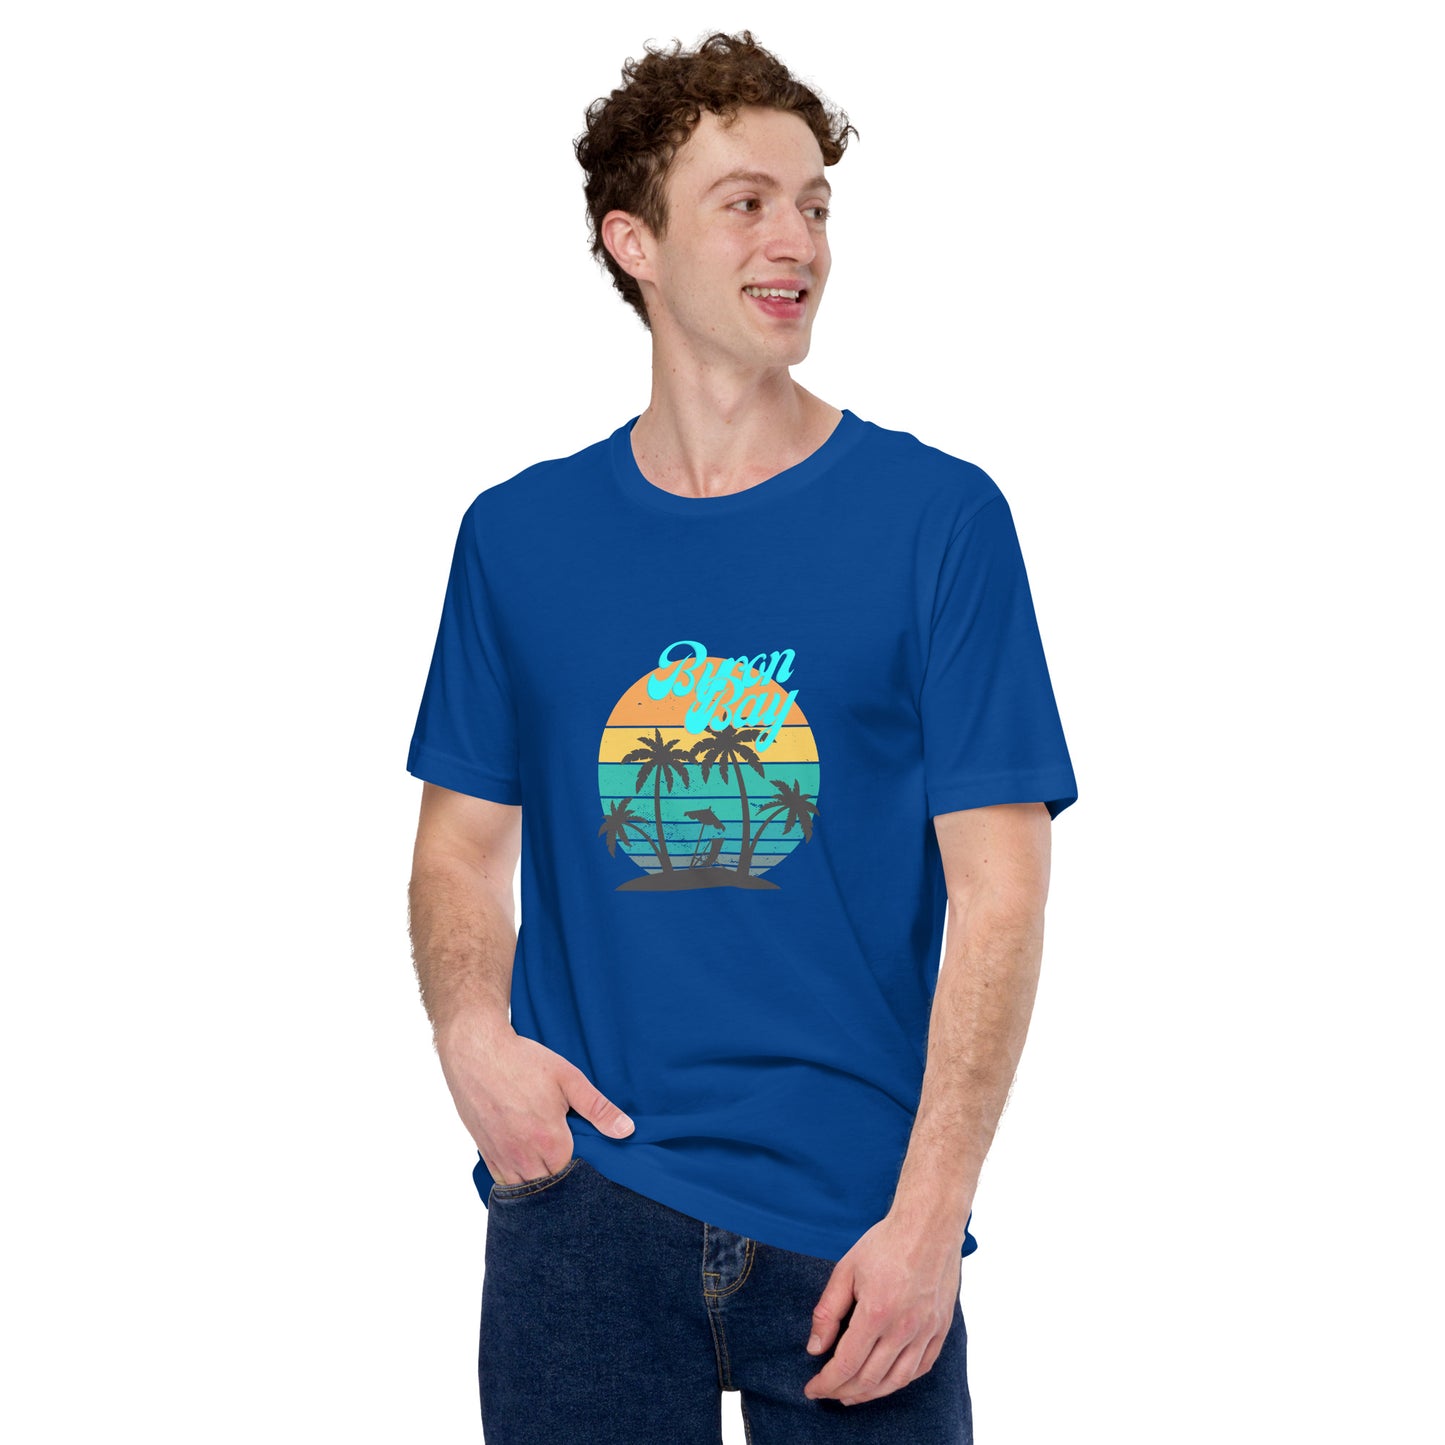  Unisex T-Shirt - True Royal Blue - Front view being warn by man one hand in pocket - Byron Bay design on front - Genuine Byron Bay Merchandise | Produced by Go Sea Kayak Byron Bay 